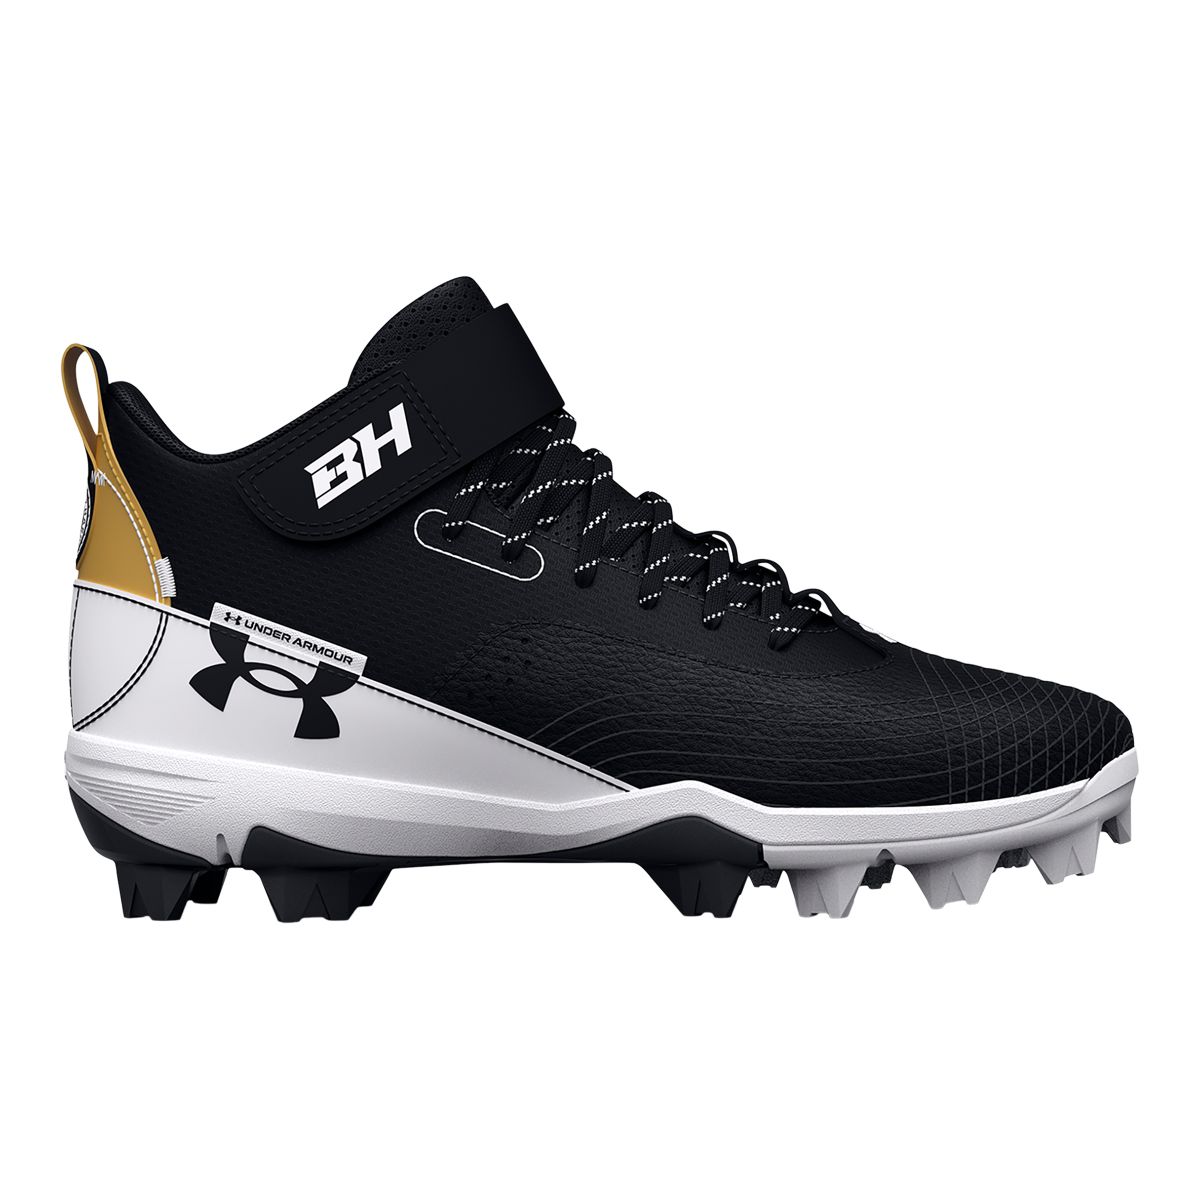 Image of Under Armour 7 Kids' Mid Rubber Molded Baseball Cleats